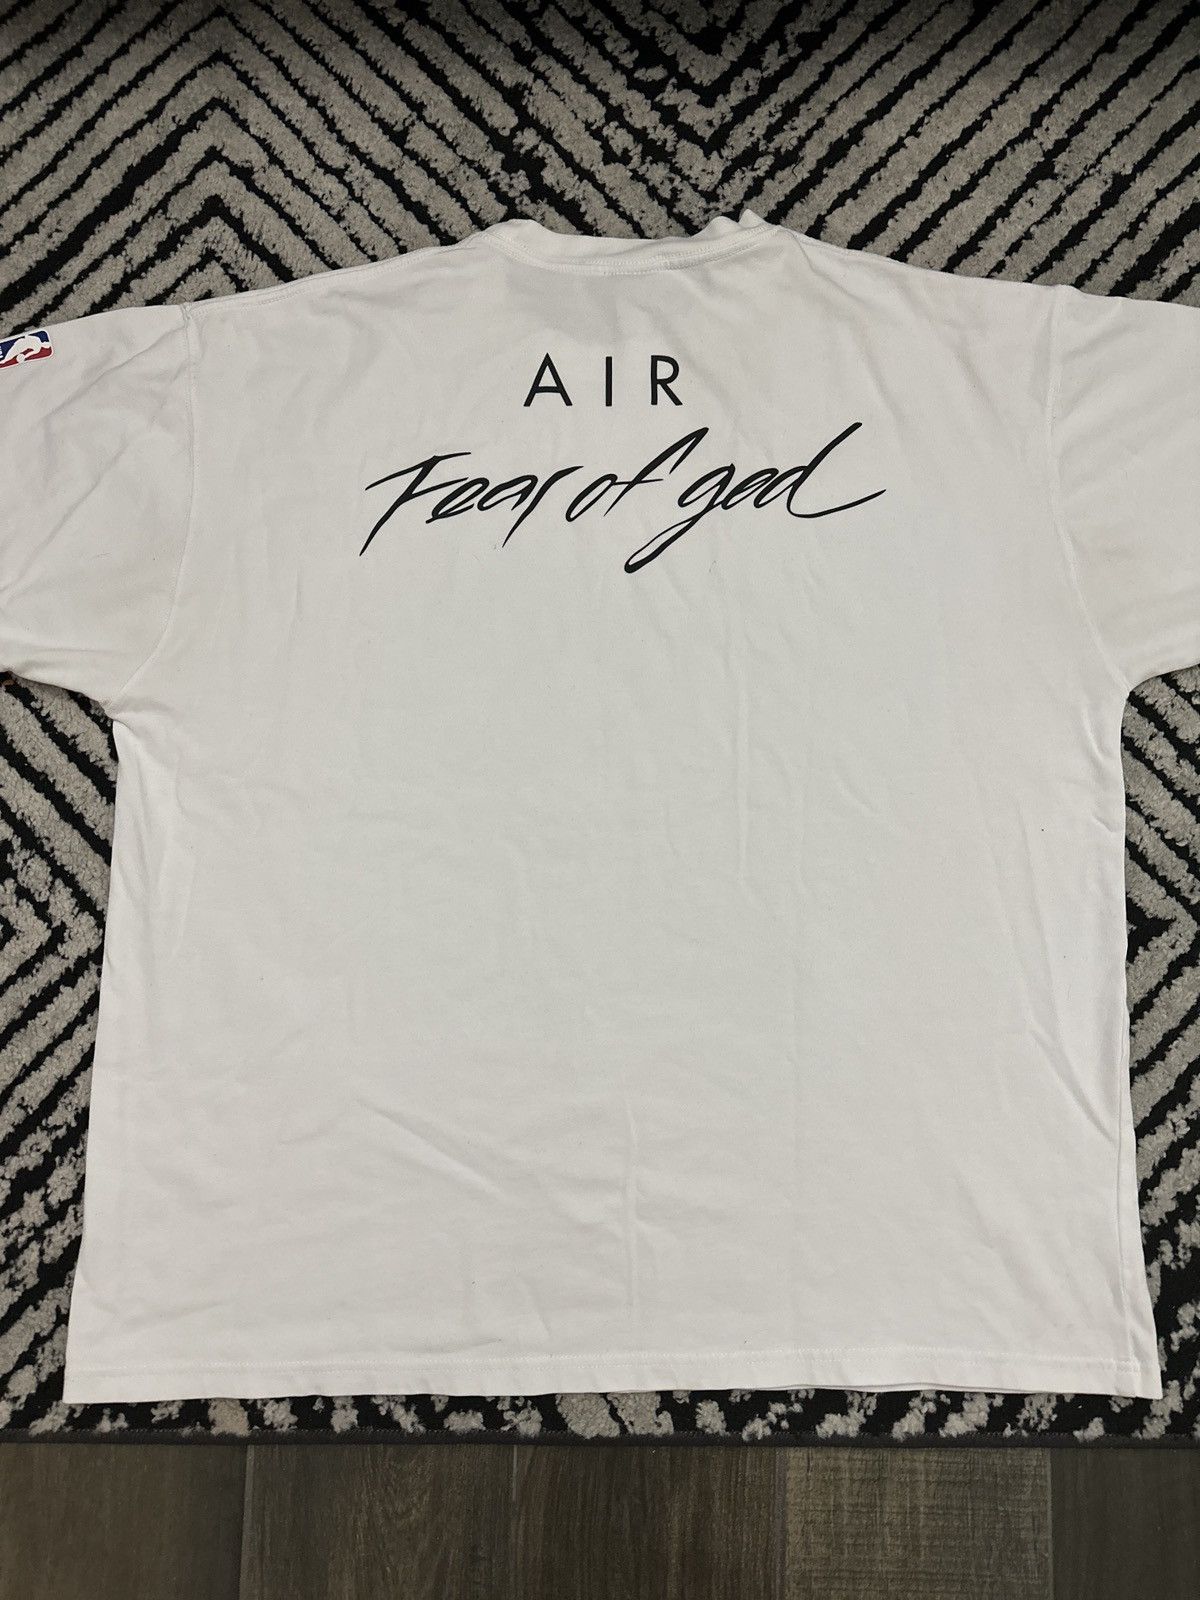 Nike Fear Of God x Nike Air Fear Of God Center Swoosh Tee White Size US L / EU 52-54 / 3 - 1 Preview